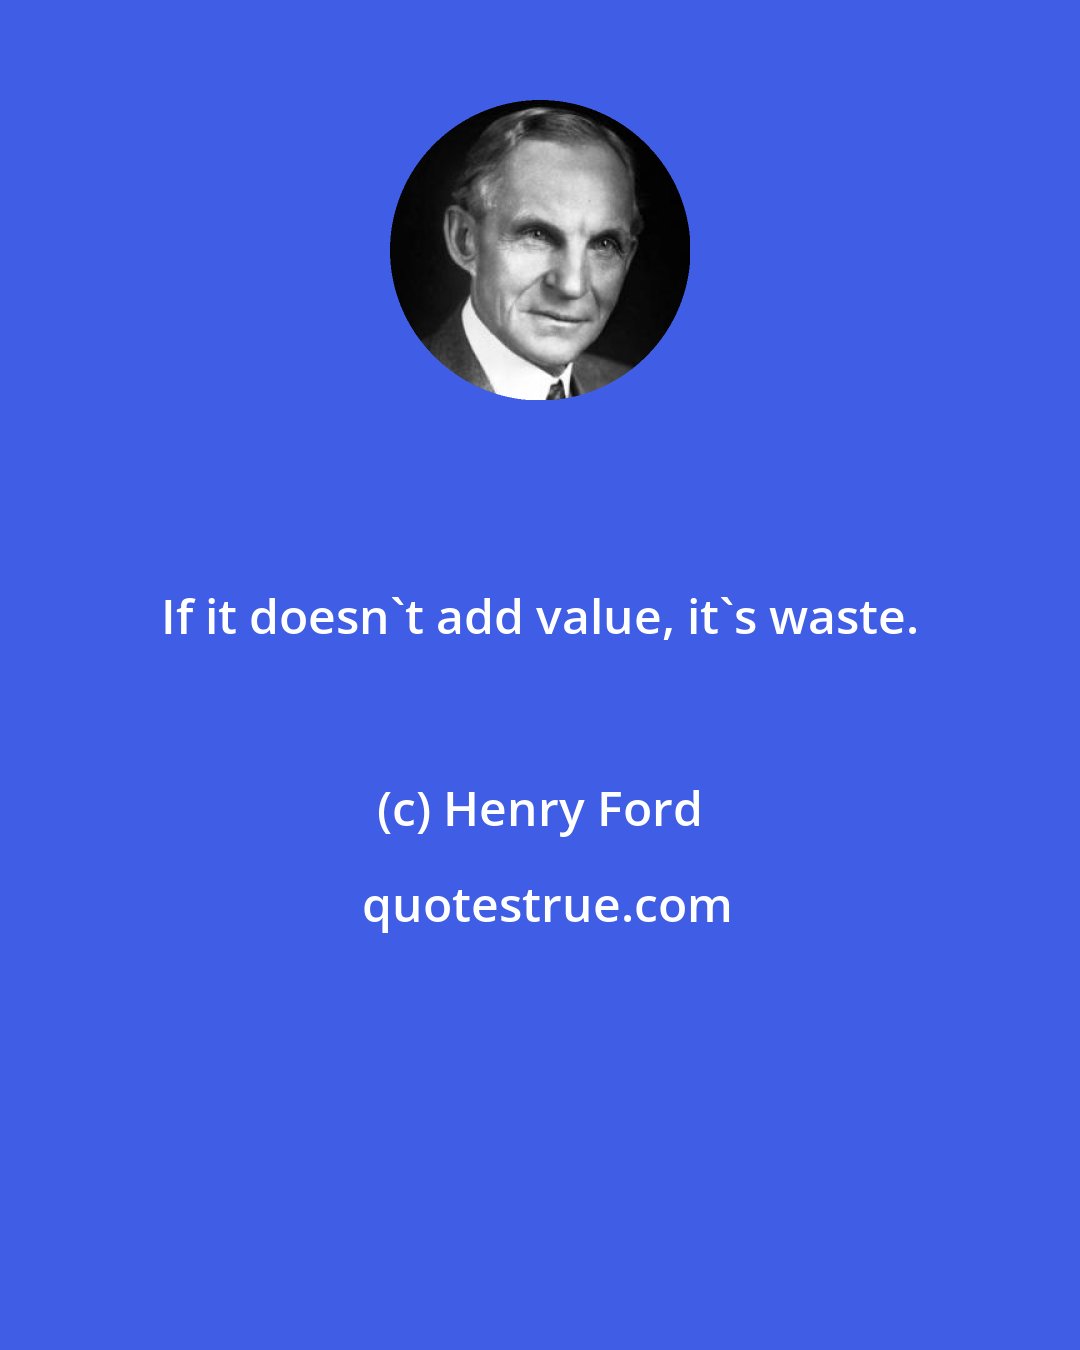 Henry Ford: If it doesn't add value, it's waste.